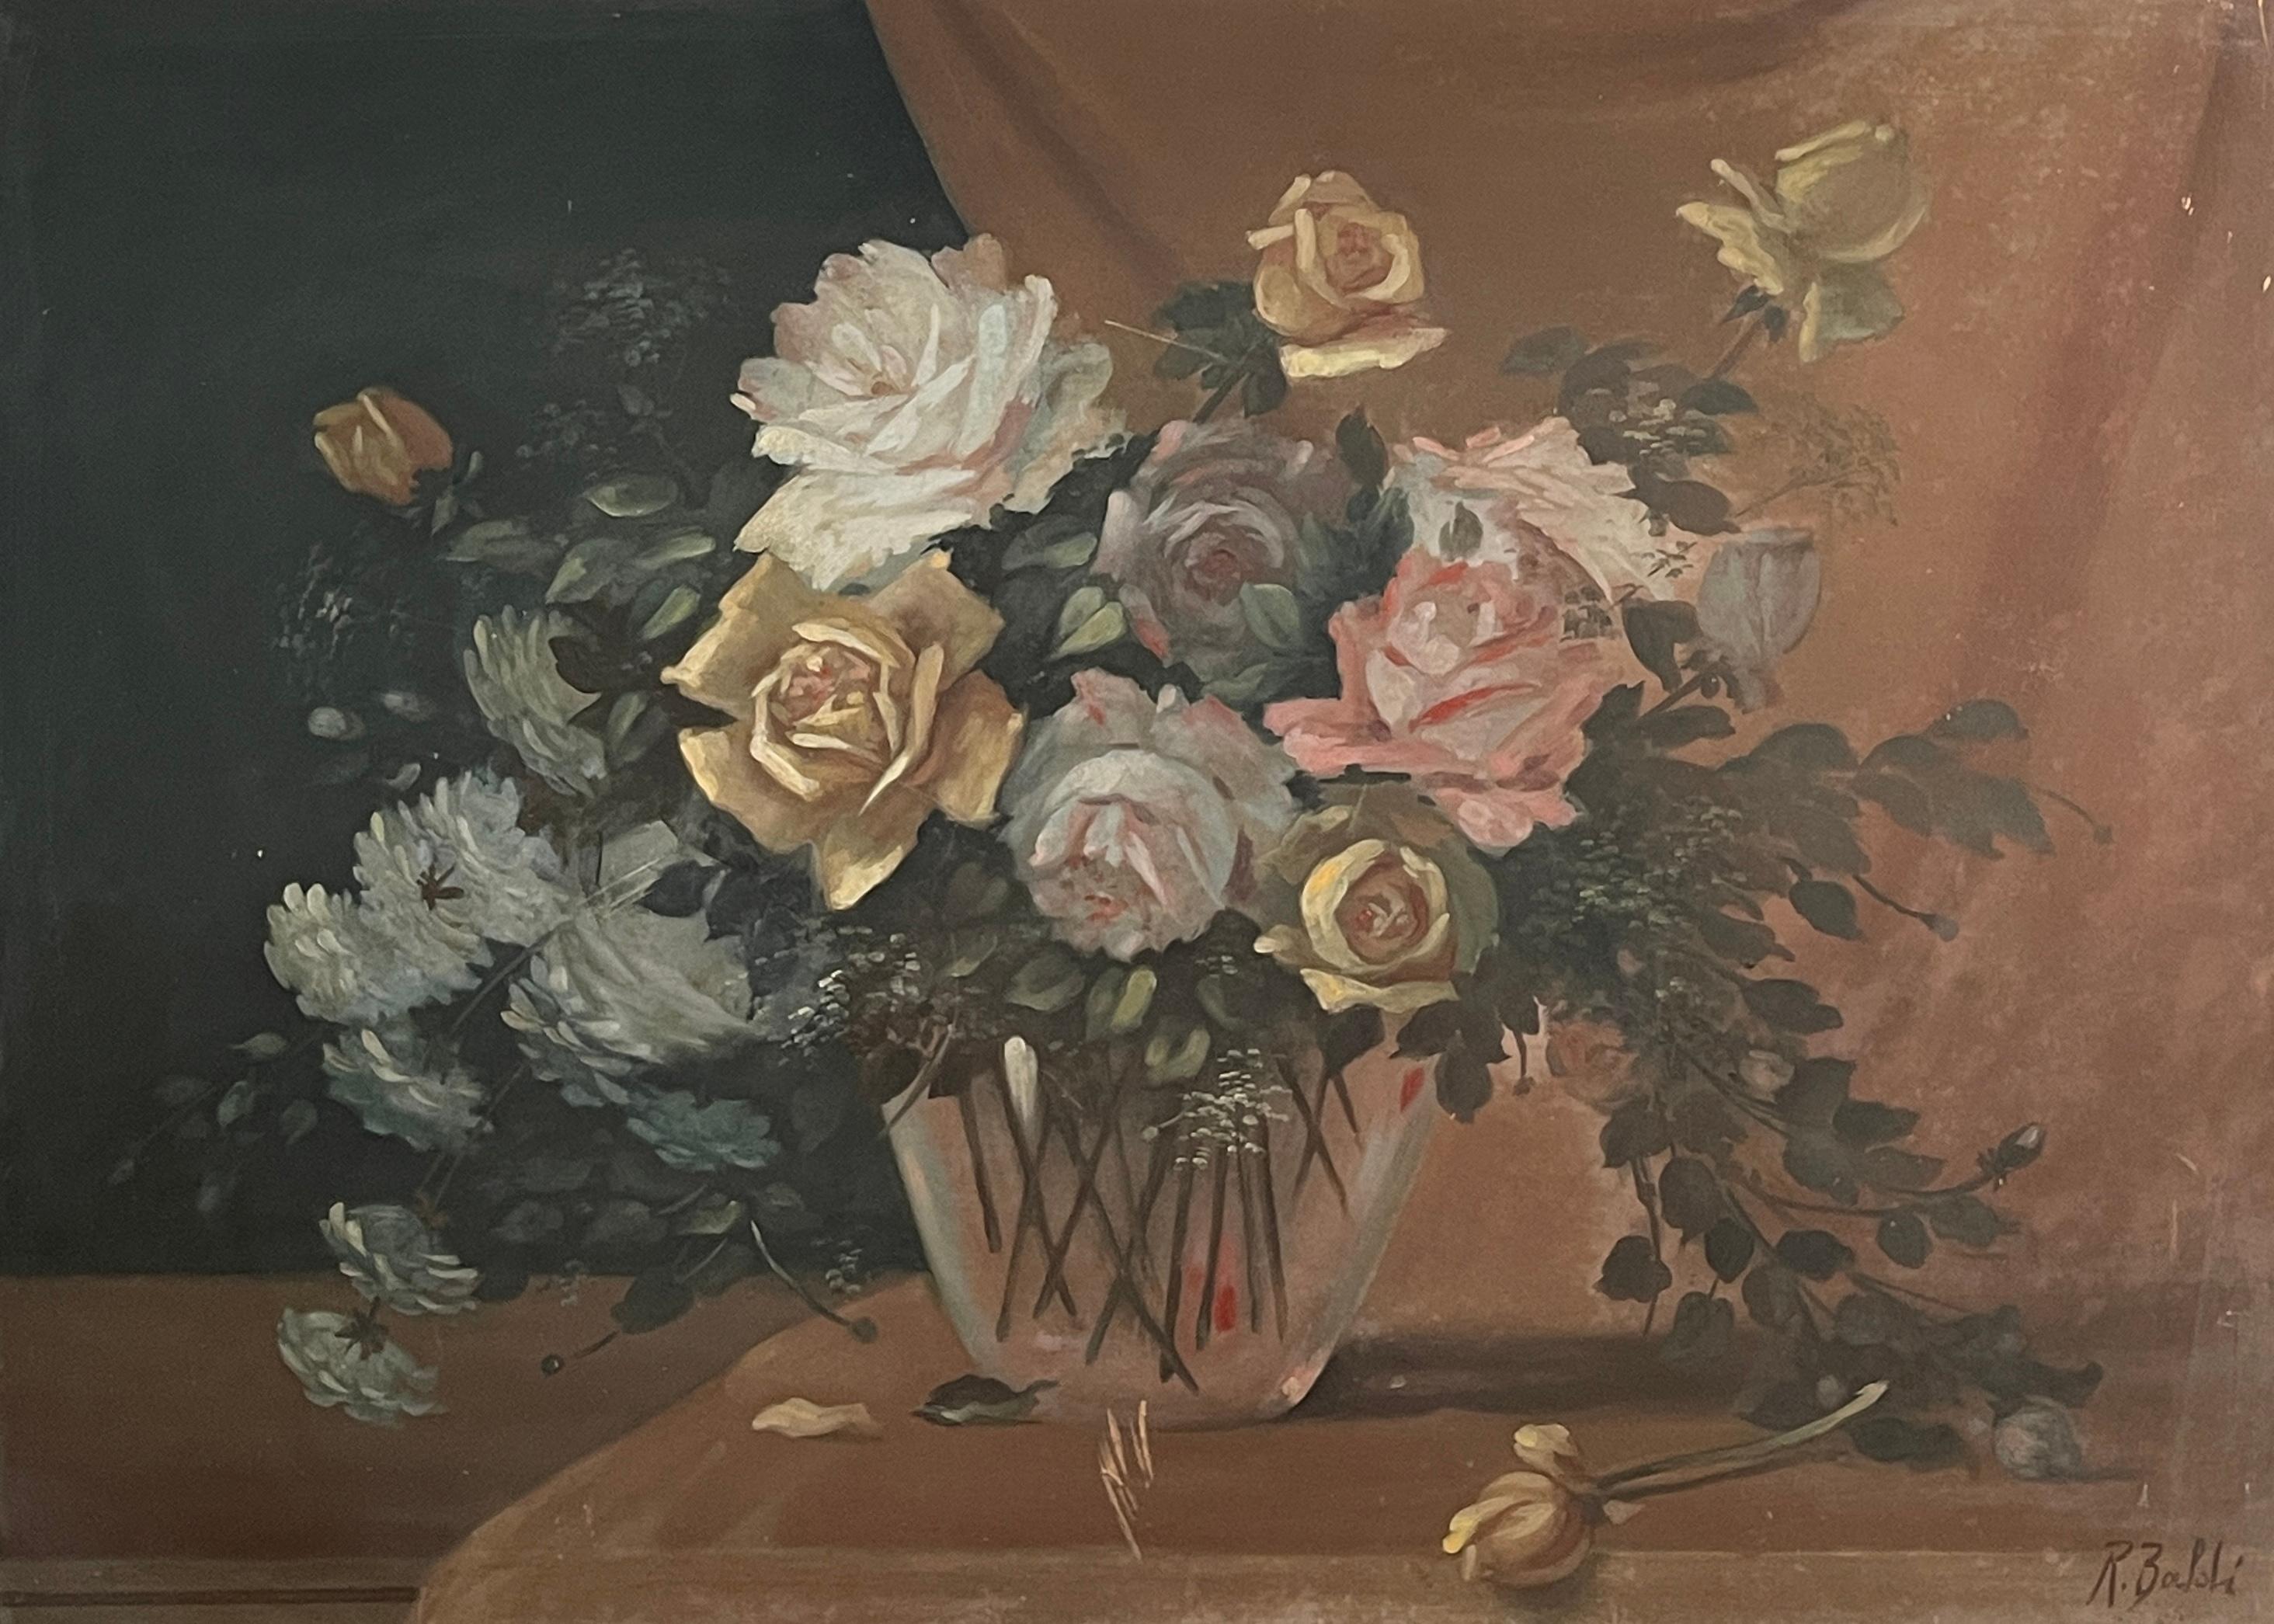 Tempera painting on wood, Vase of flowers, Raffaele Baldi
Painting in soft, delicate colours, embellished with a white lacquered frame. Work executed in the 20th century, signed lower right, R. Baldi
Good condition as from picture
Dimensions